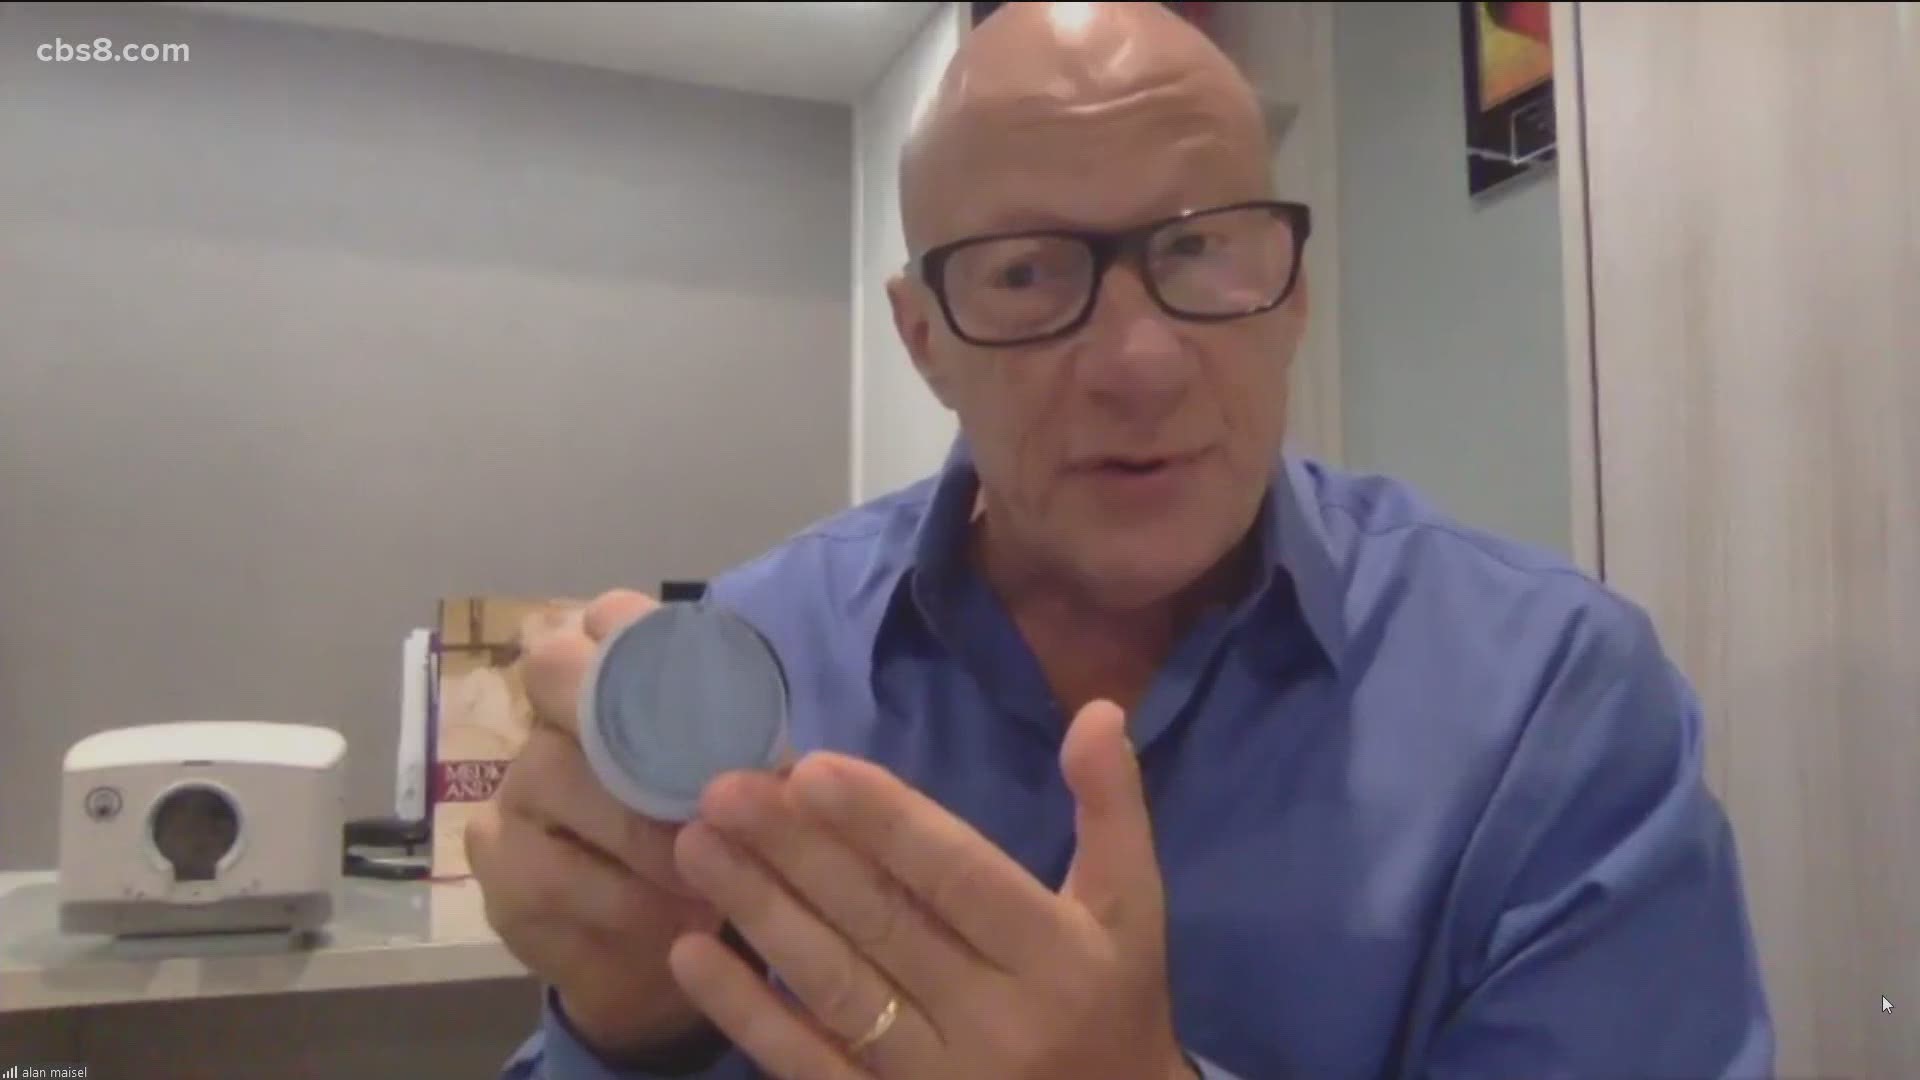 Co-founder of AseptiScope, Dr. Alan Maisel, shares how the stethoscope has a dirty secret that’s to be exposed and how to stay safe.